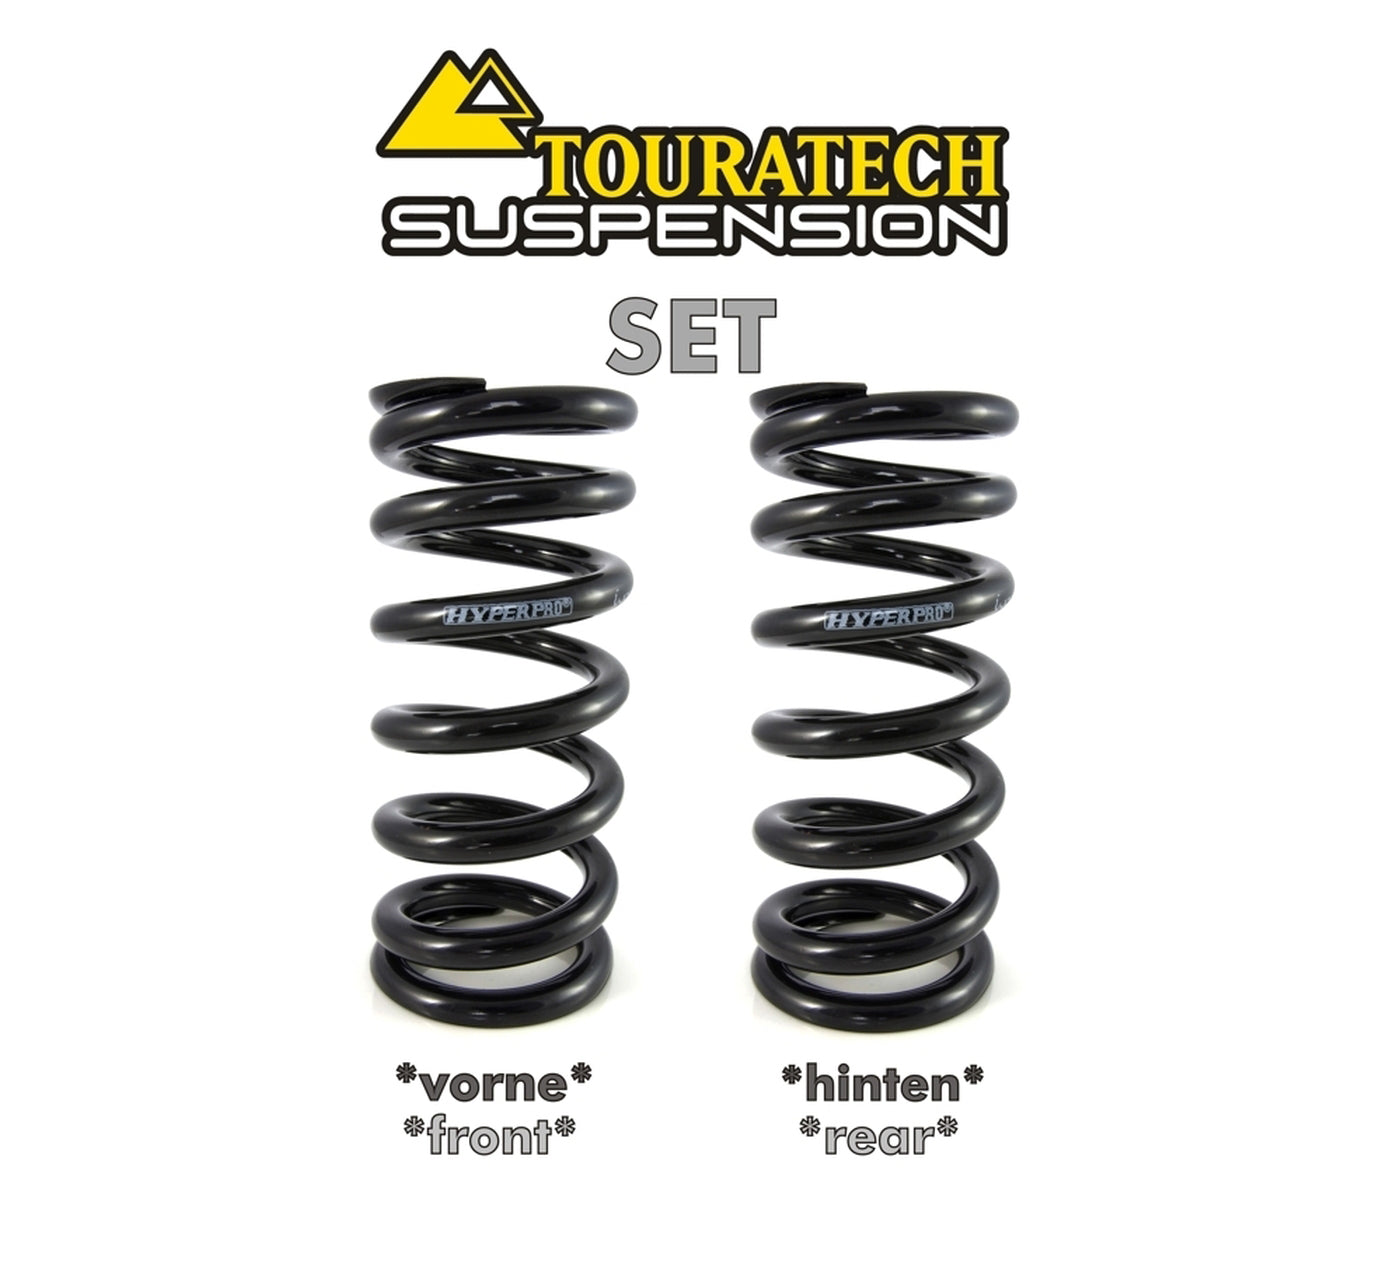 Touratech Suspension progressive replacement springs for BMW R 1100 S BOXER CUP REPLICA 1998 - 2004